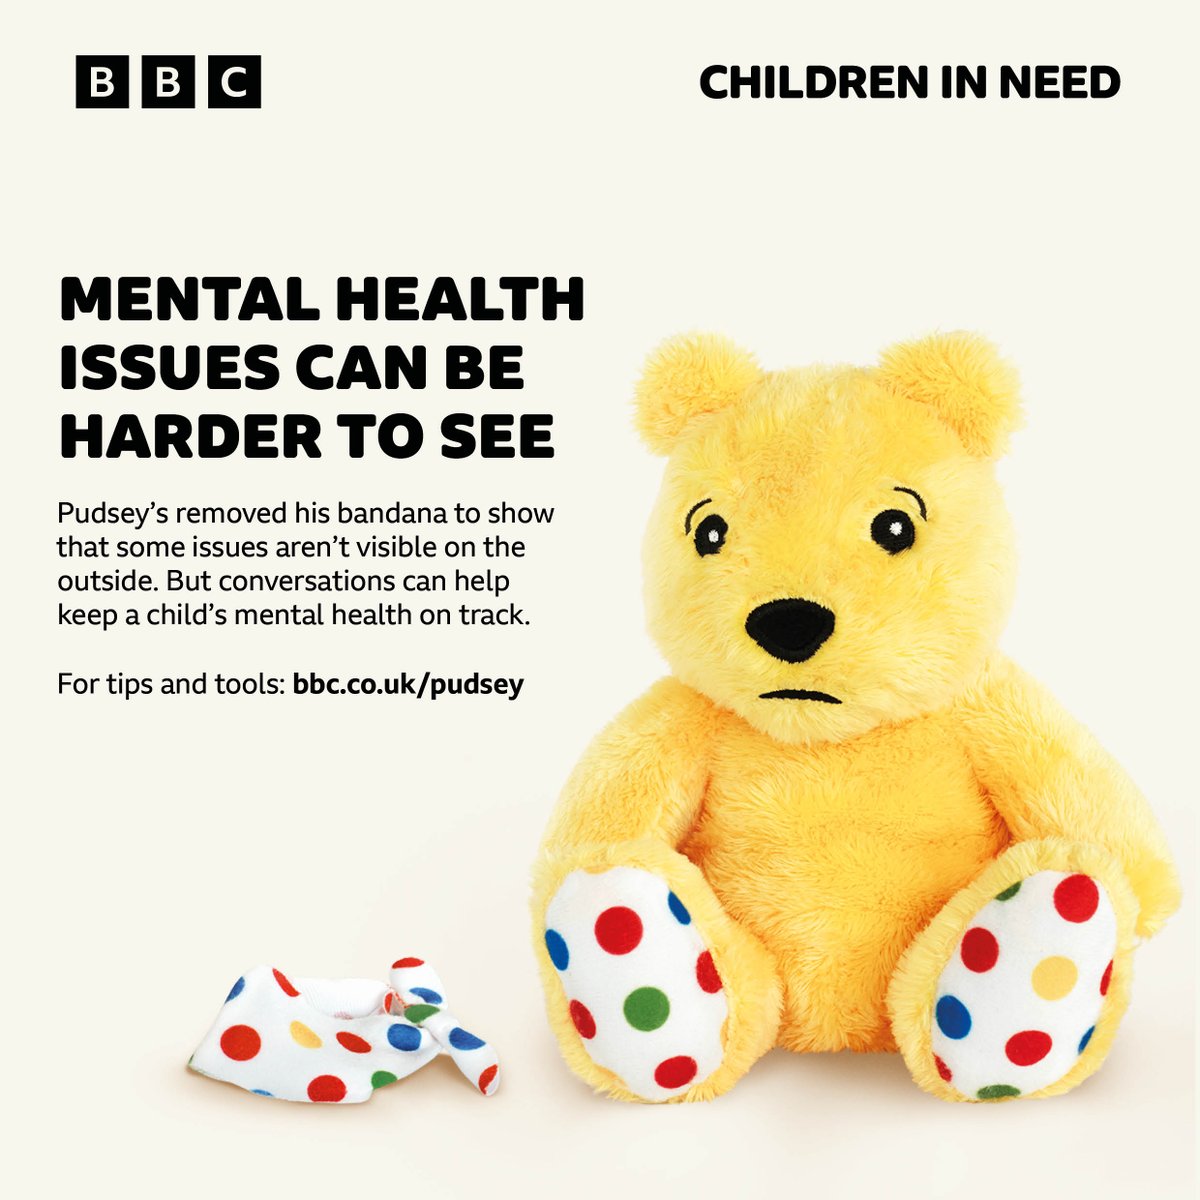 This #MentalHealthAwarenessWeek, Pudsey’s temporarily removed his bandana. Our 'Behind the Bandana' campaign is there to show that mental health issues are often less visible and to encourage conversations that can help. Head here for tips and tools 👉 bbc.co.uk/pudsey